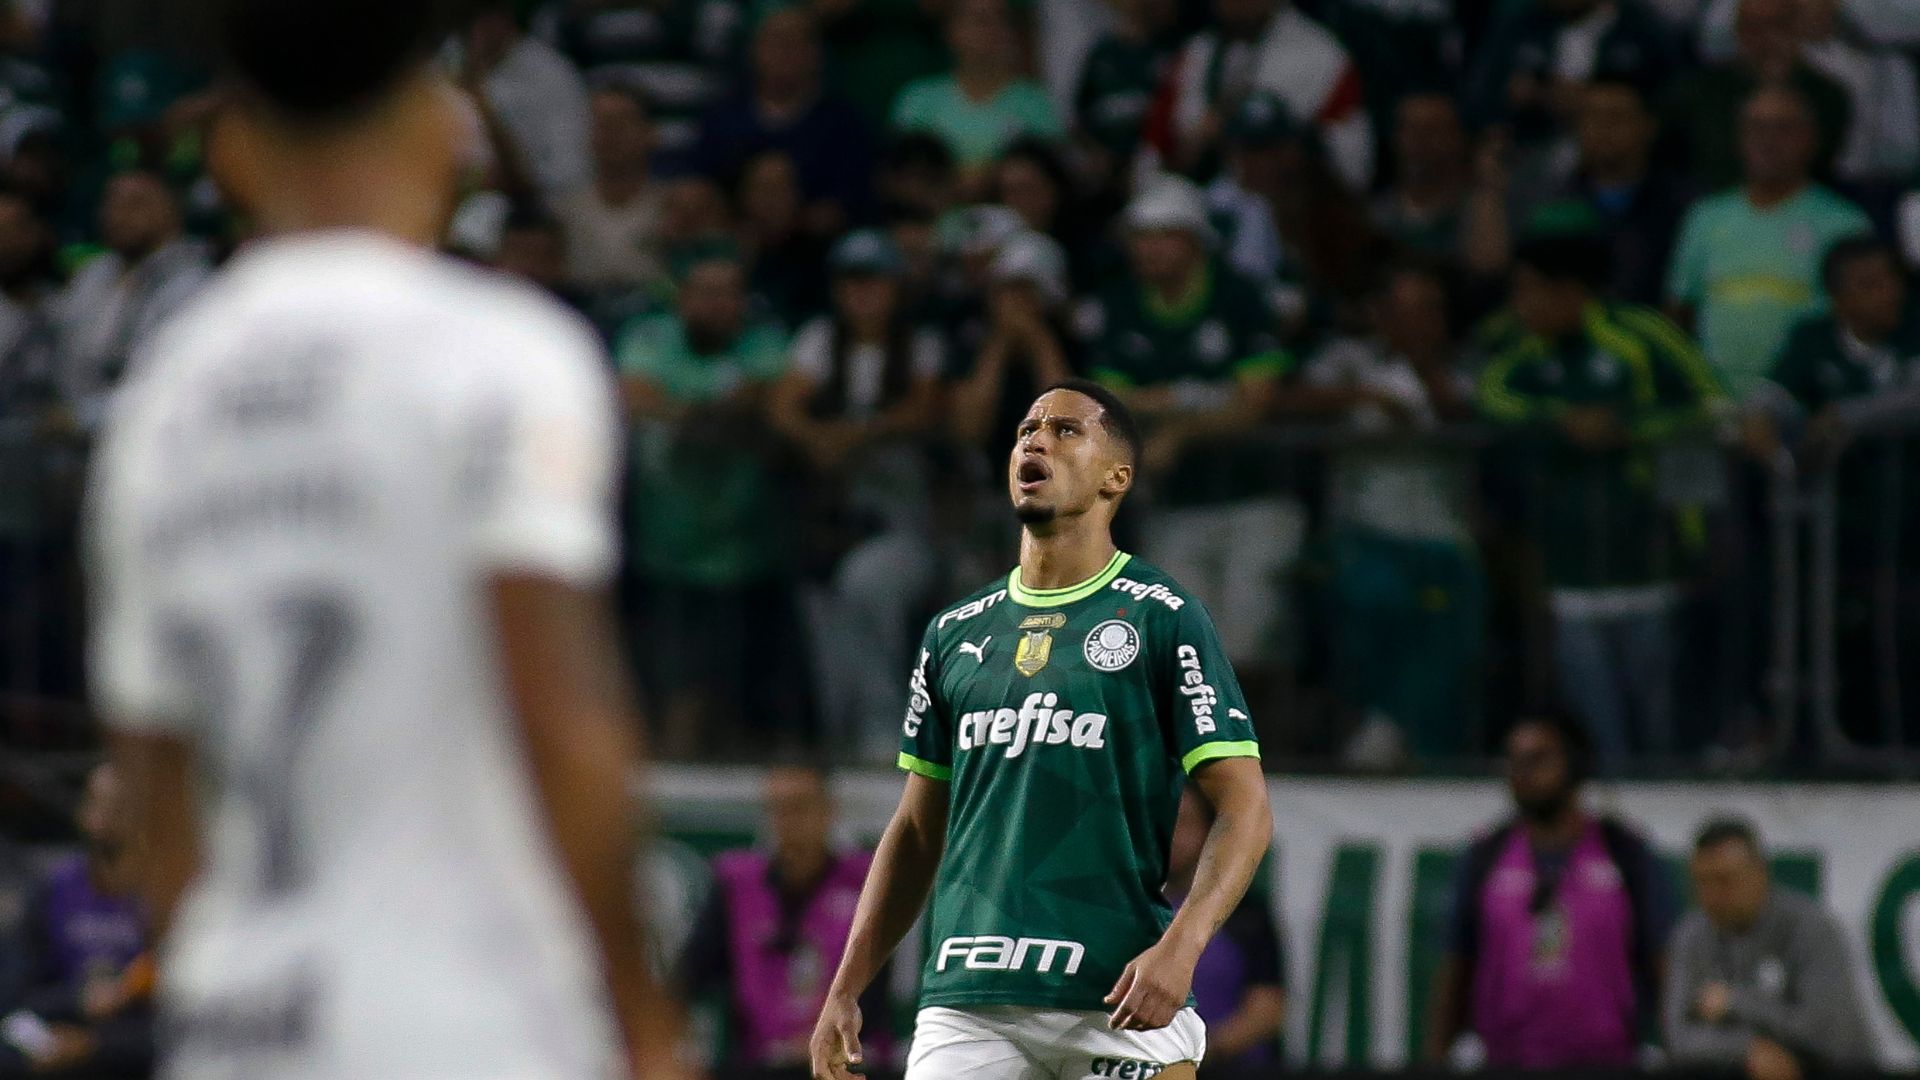 Murilo in action for Palmeiras (Credit: Getty Images)